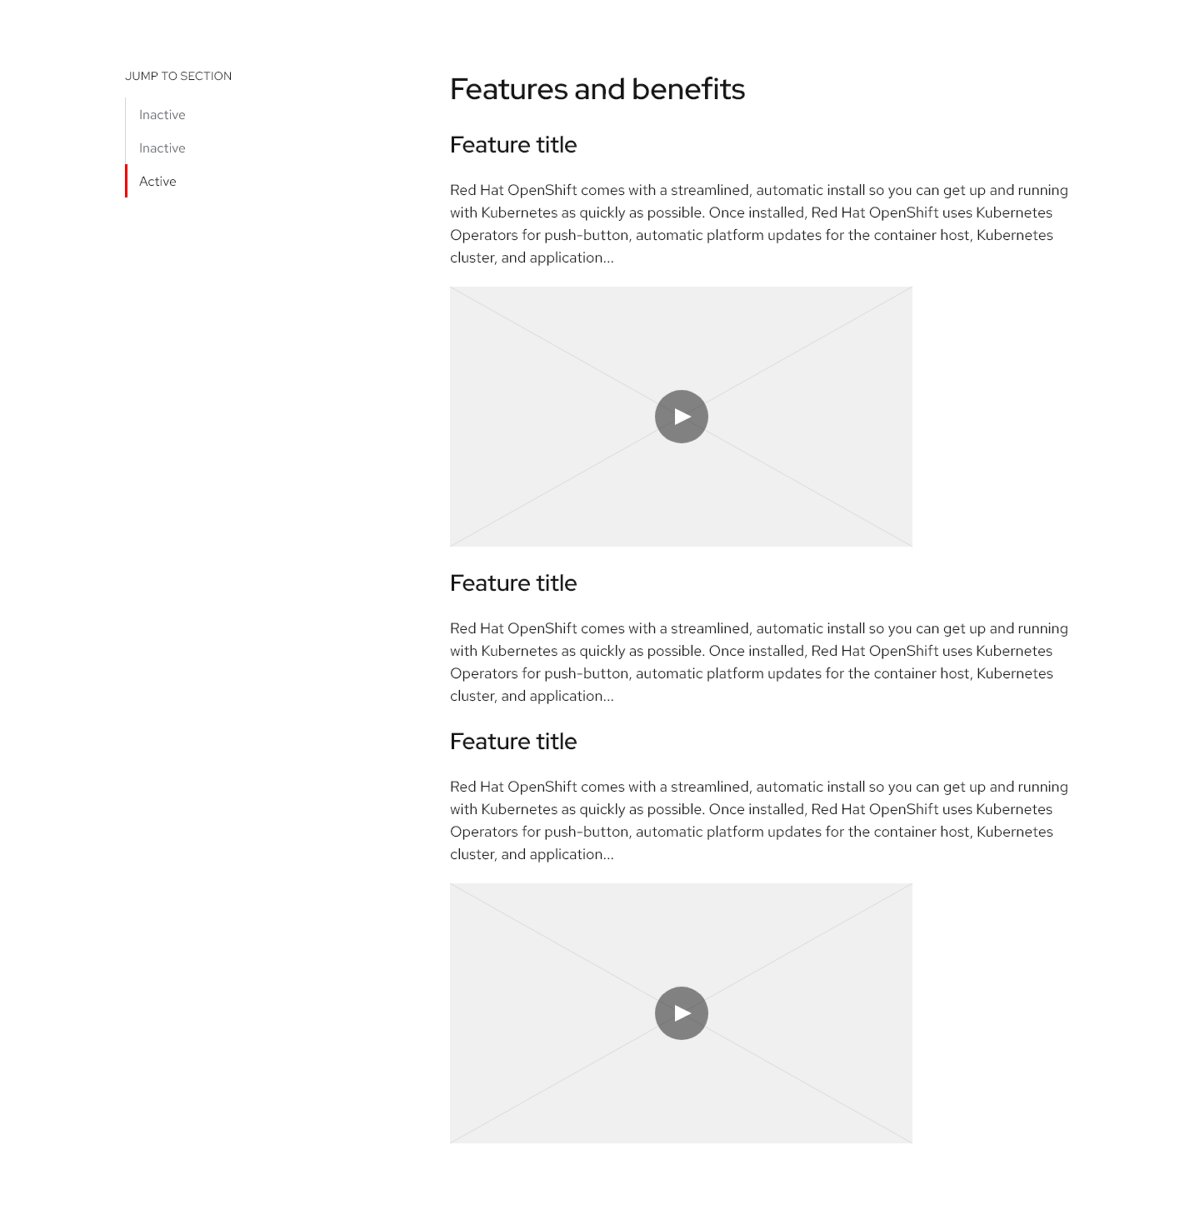 A new template for a features section of a product page that does include video